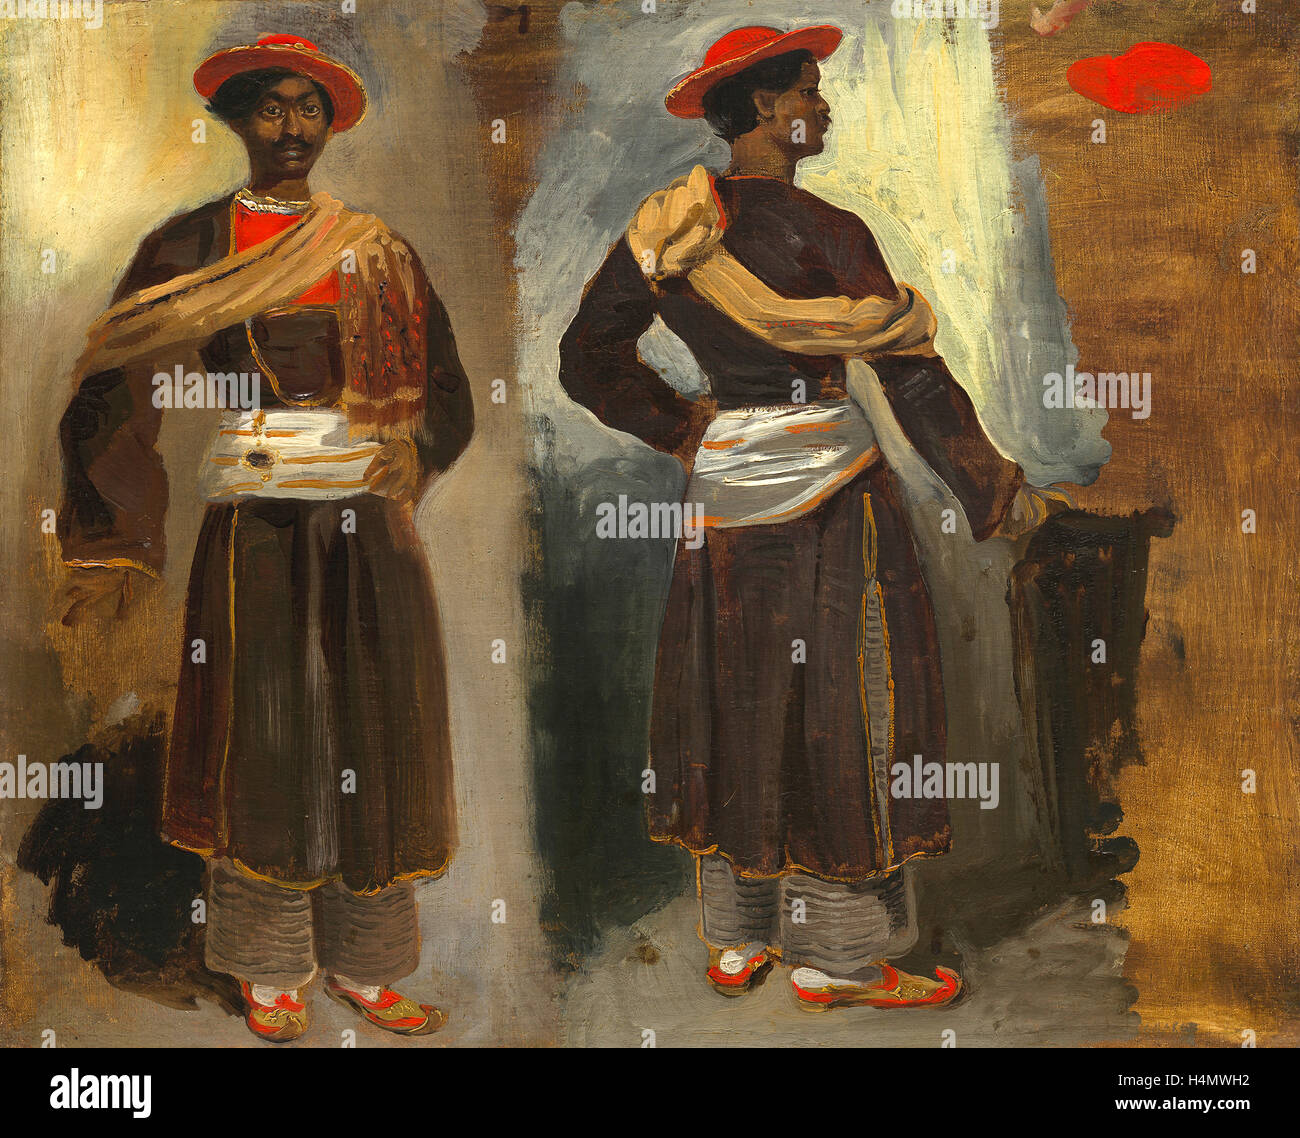 Eugène Delacroix (French, 1798 - 1863), Two Studies of a Standing Indian from Calcutta, c. 1823-1824, oil on canvas Stock Photo